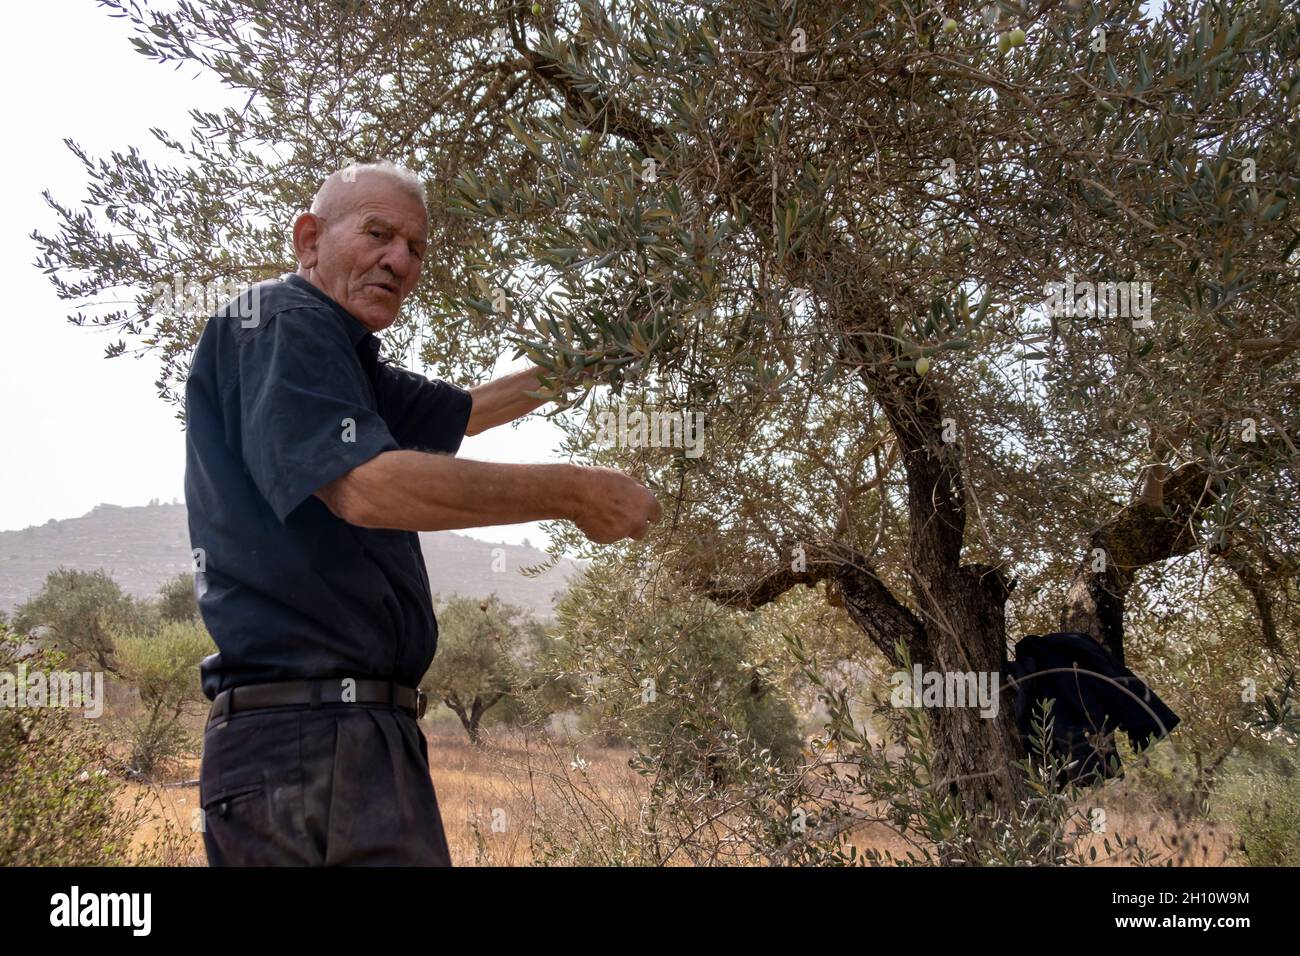 A Palestinian man collects olives in an olive grove near the Jewish settlement of Eli on October 14, 2021 in the West Bank, Israel. The olive harvest is an ancient Palestinian ritual, which marks the changing of the seasons around October and November. The olive oil industry is important to Palestinian communities, with its profits supporting the livelihoods of an estimated 80,000 families. Stock Photo